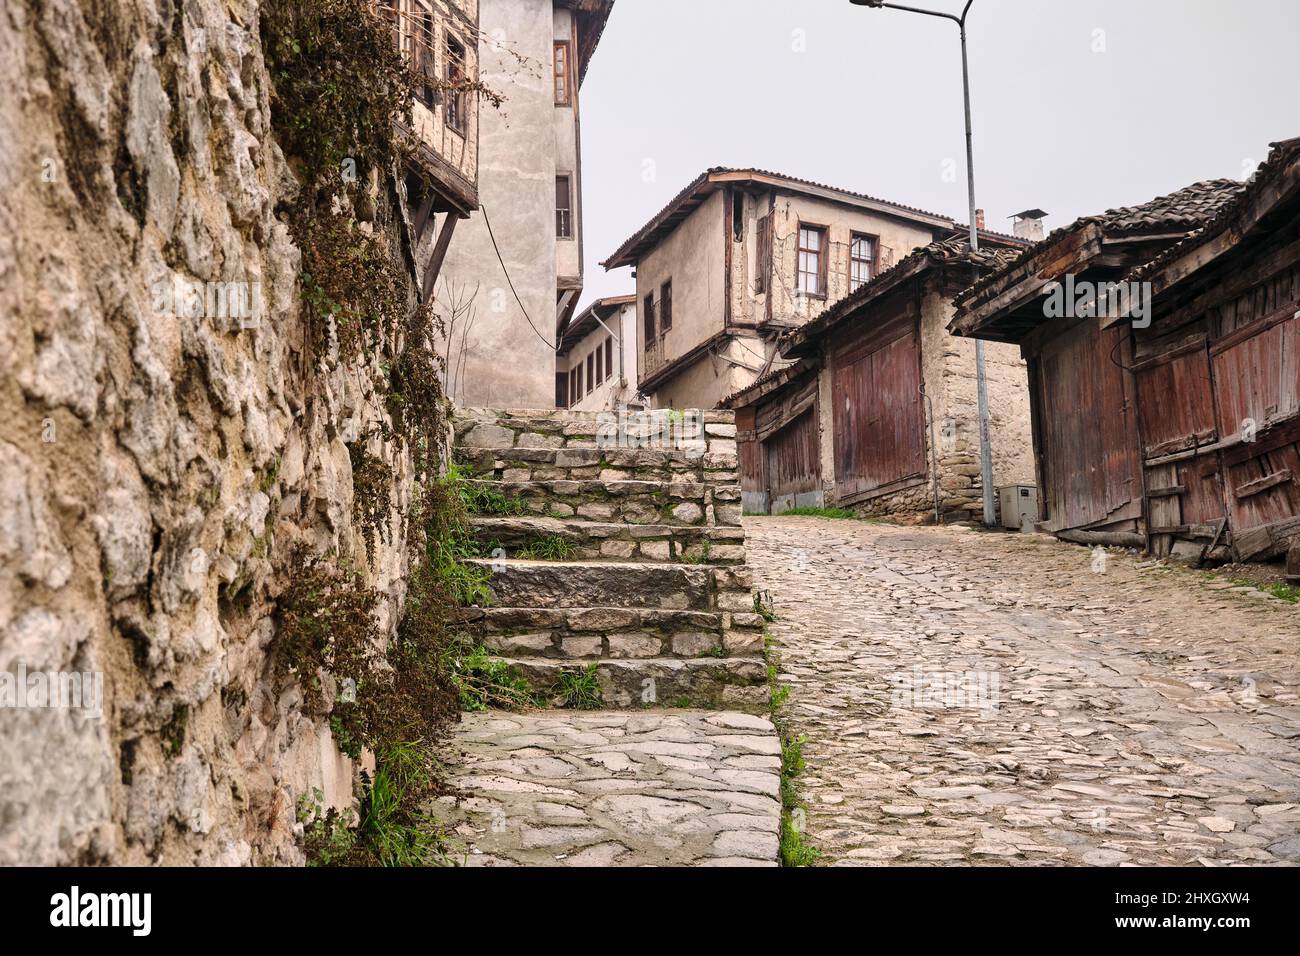 Safranbolu houses at winter, cobblestone way and ancient ottoman style houses at Safranbolu Stock Photo